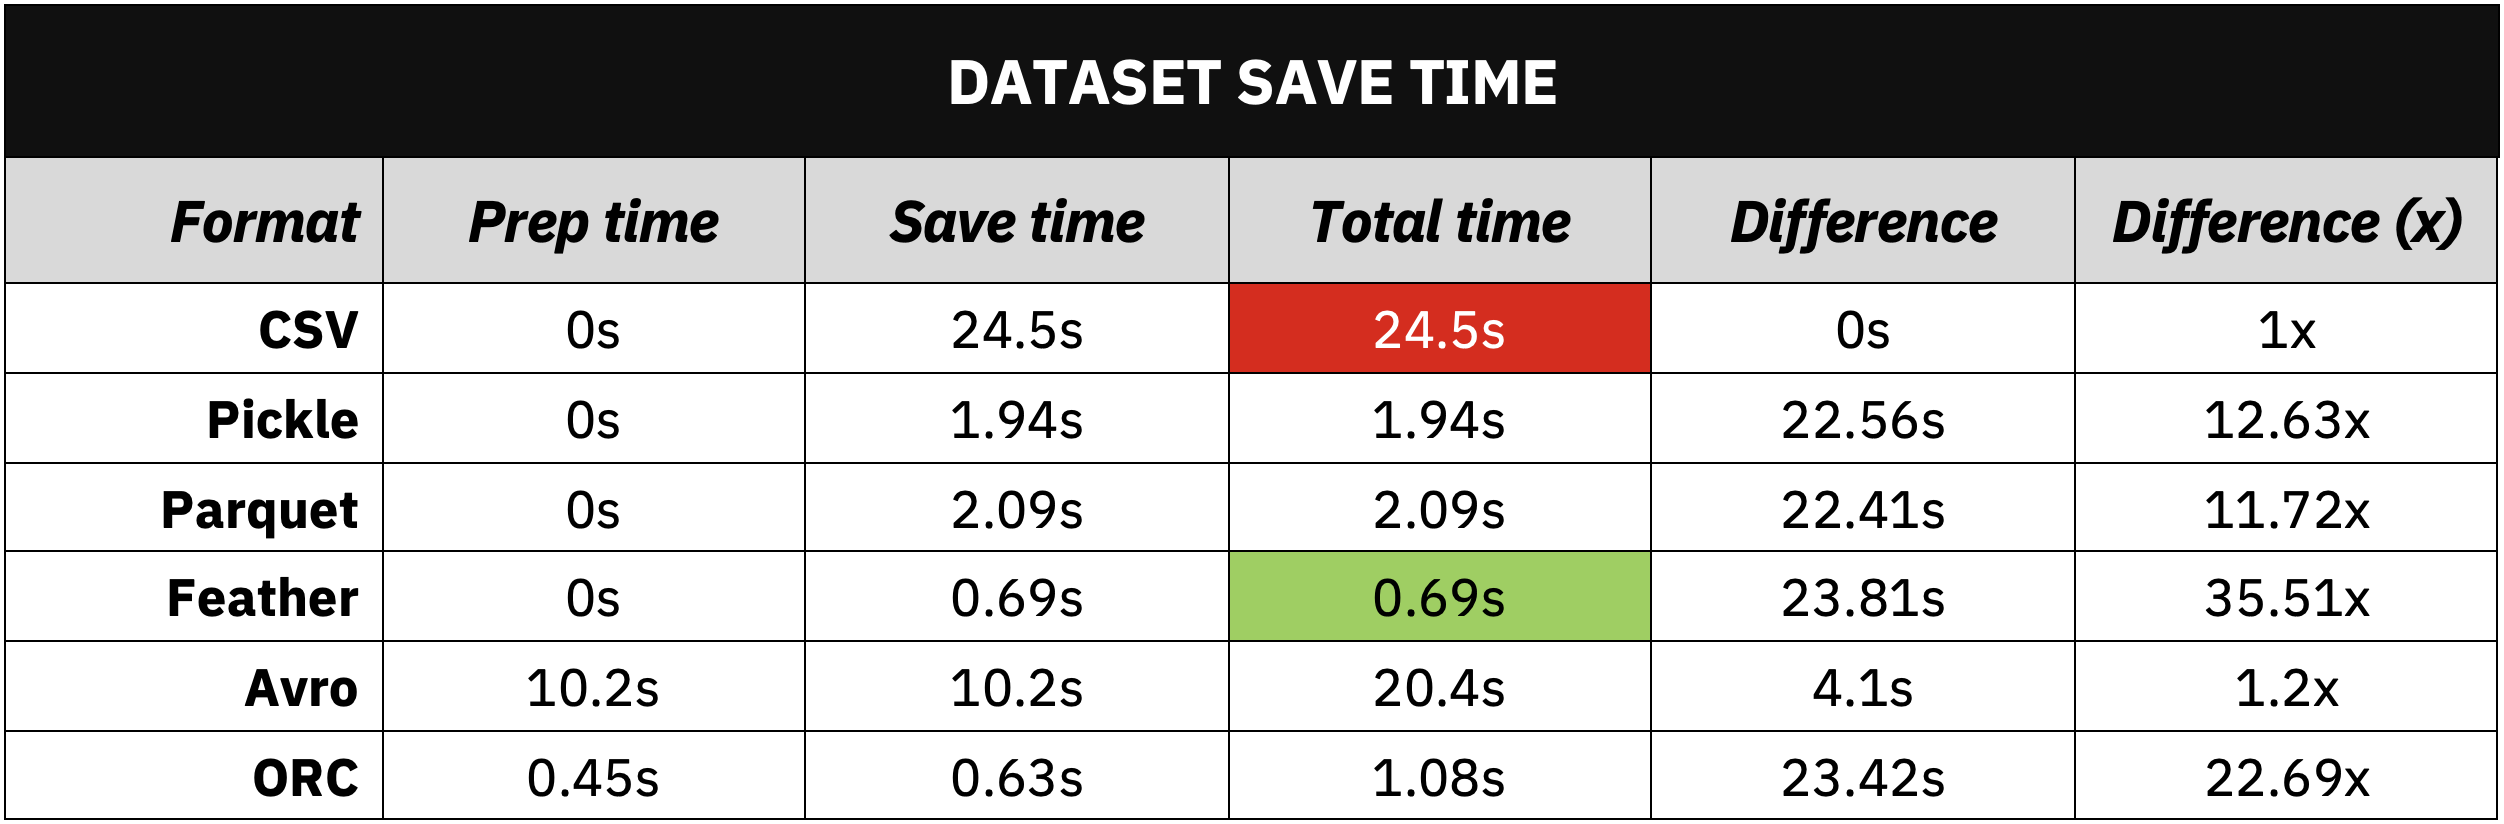 Image 2 - Dataset save time comparison (image by author)